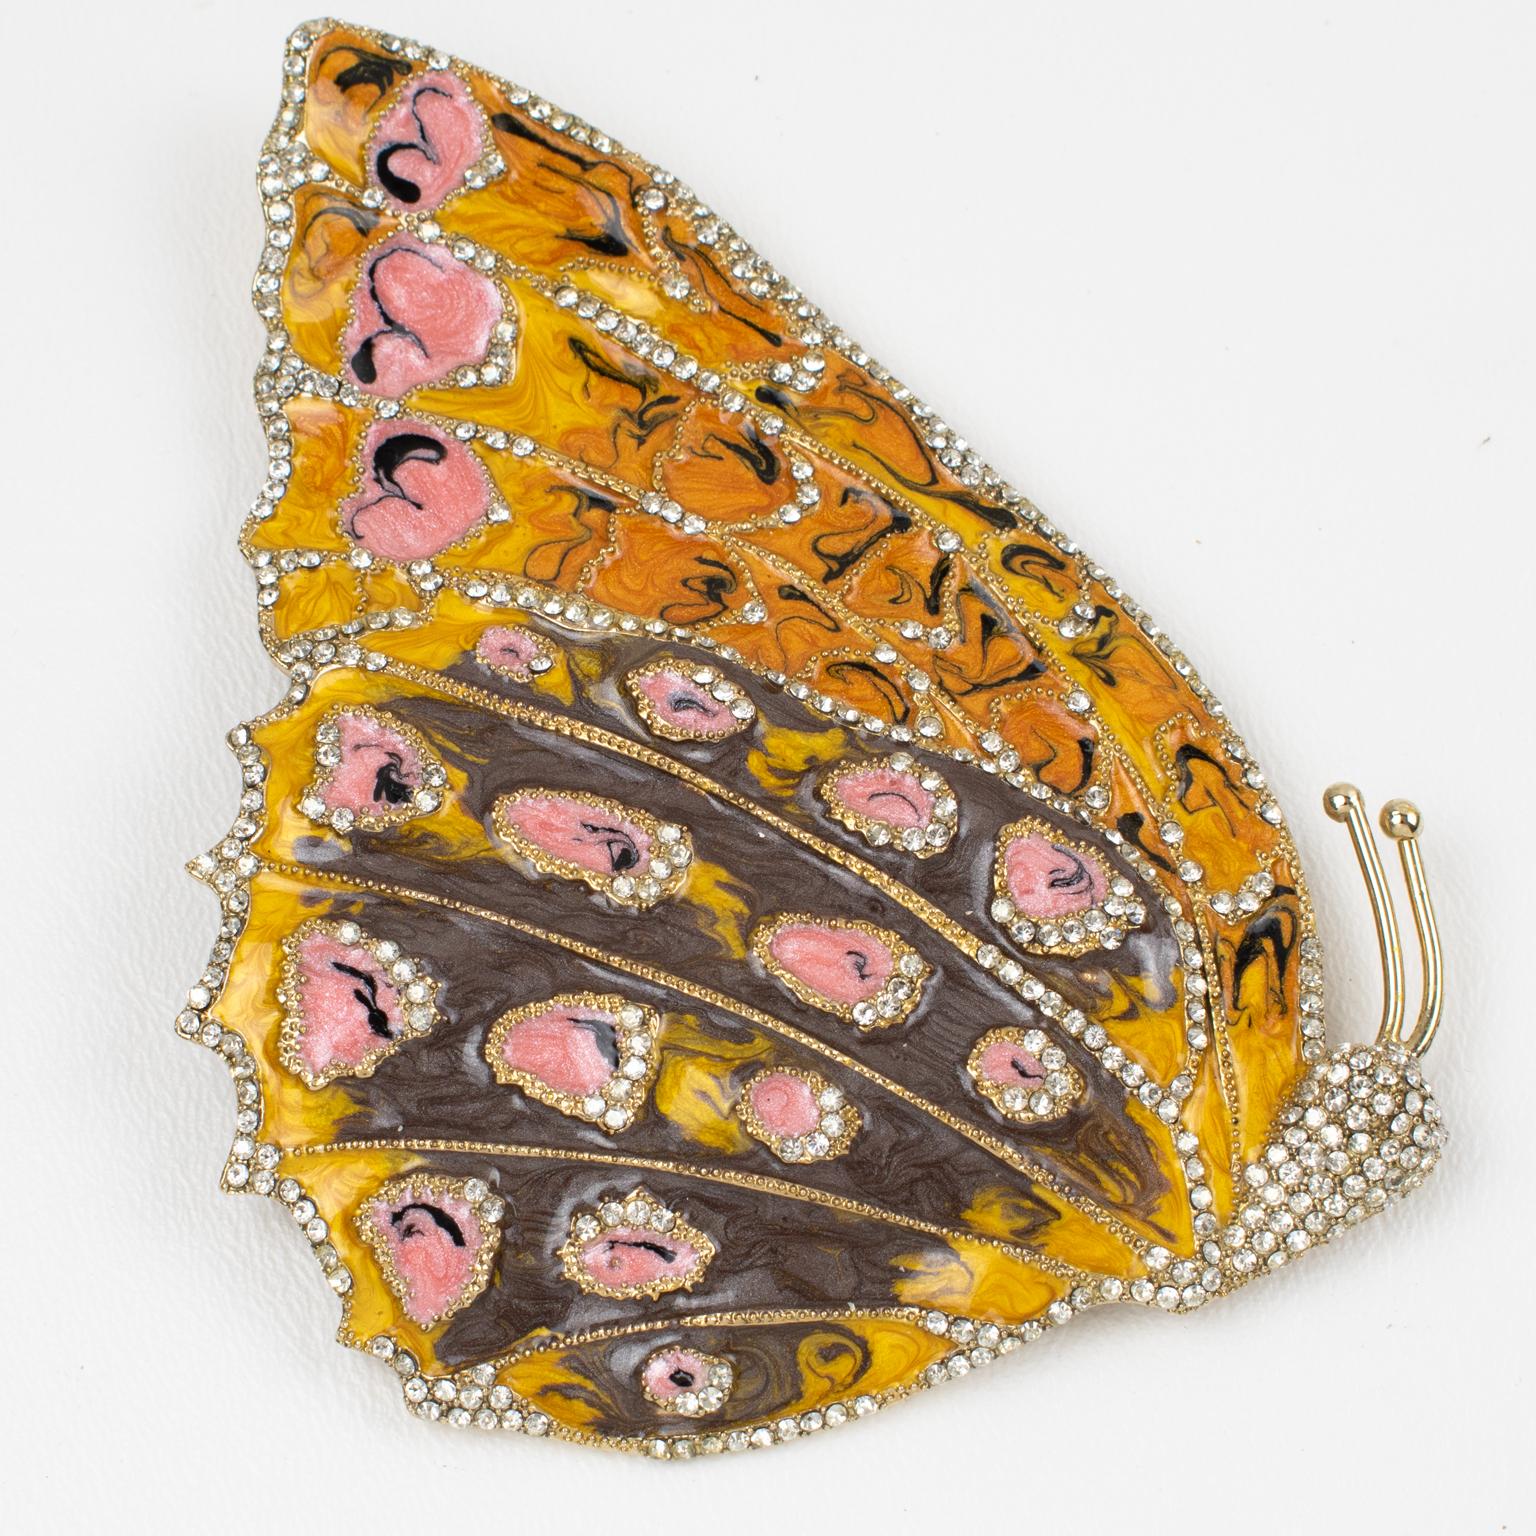 Refined Valentino Garavani couture pin brooch. Huge dimensional gilt metal butterfly shape, all covered with orange, brown, yellow, and pink enamel and ornate with tiny crystal rhinestones. Security closing clasp. Valentino hallmark